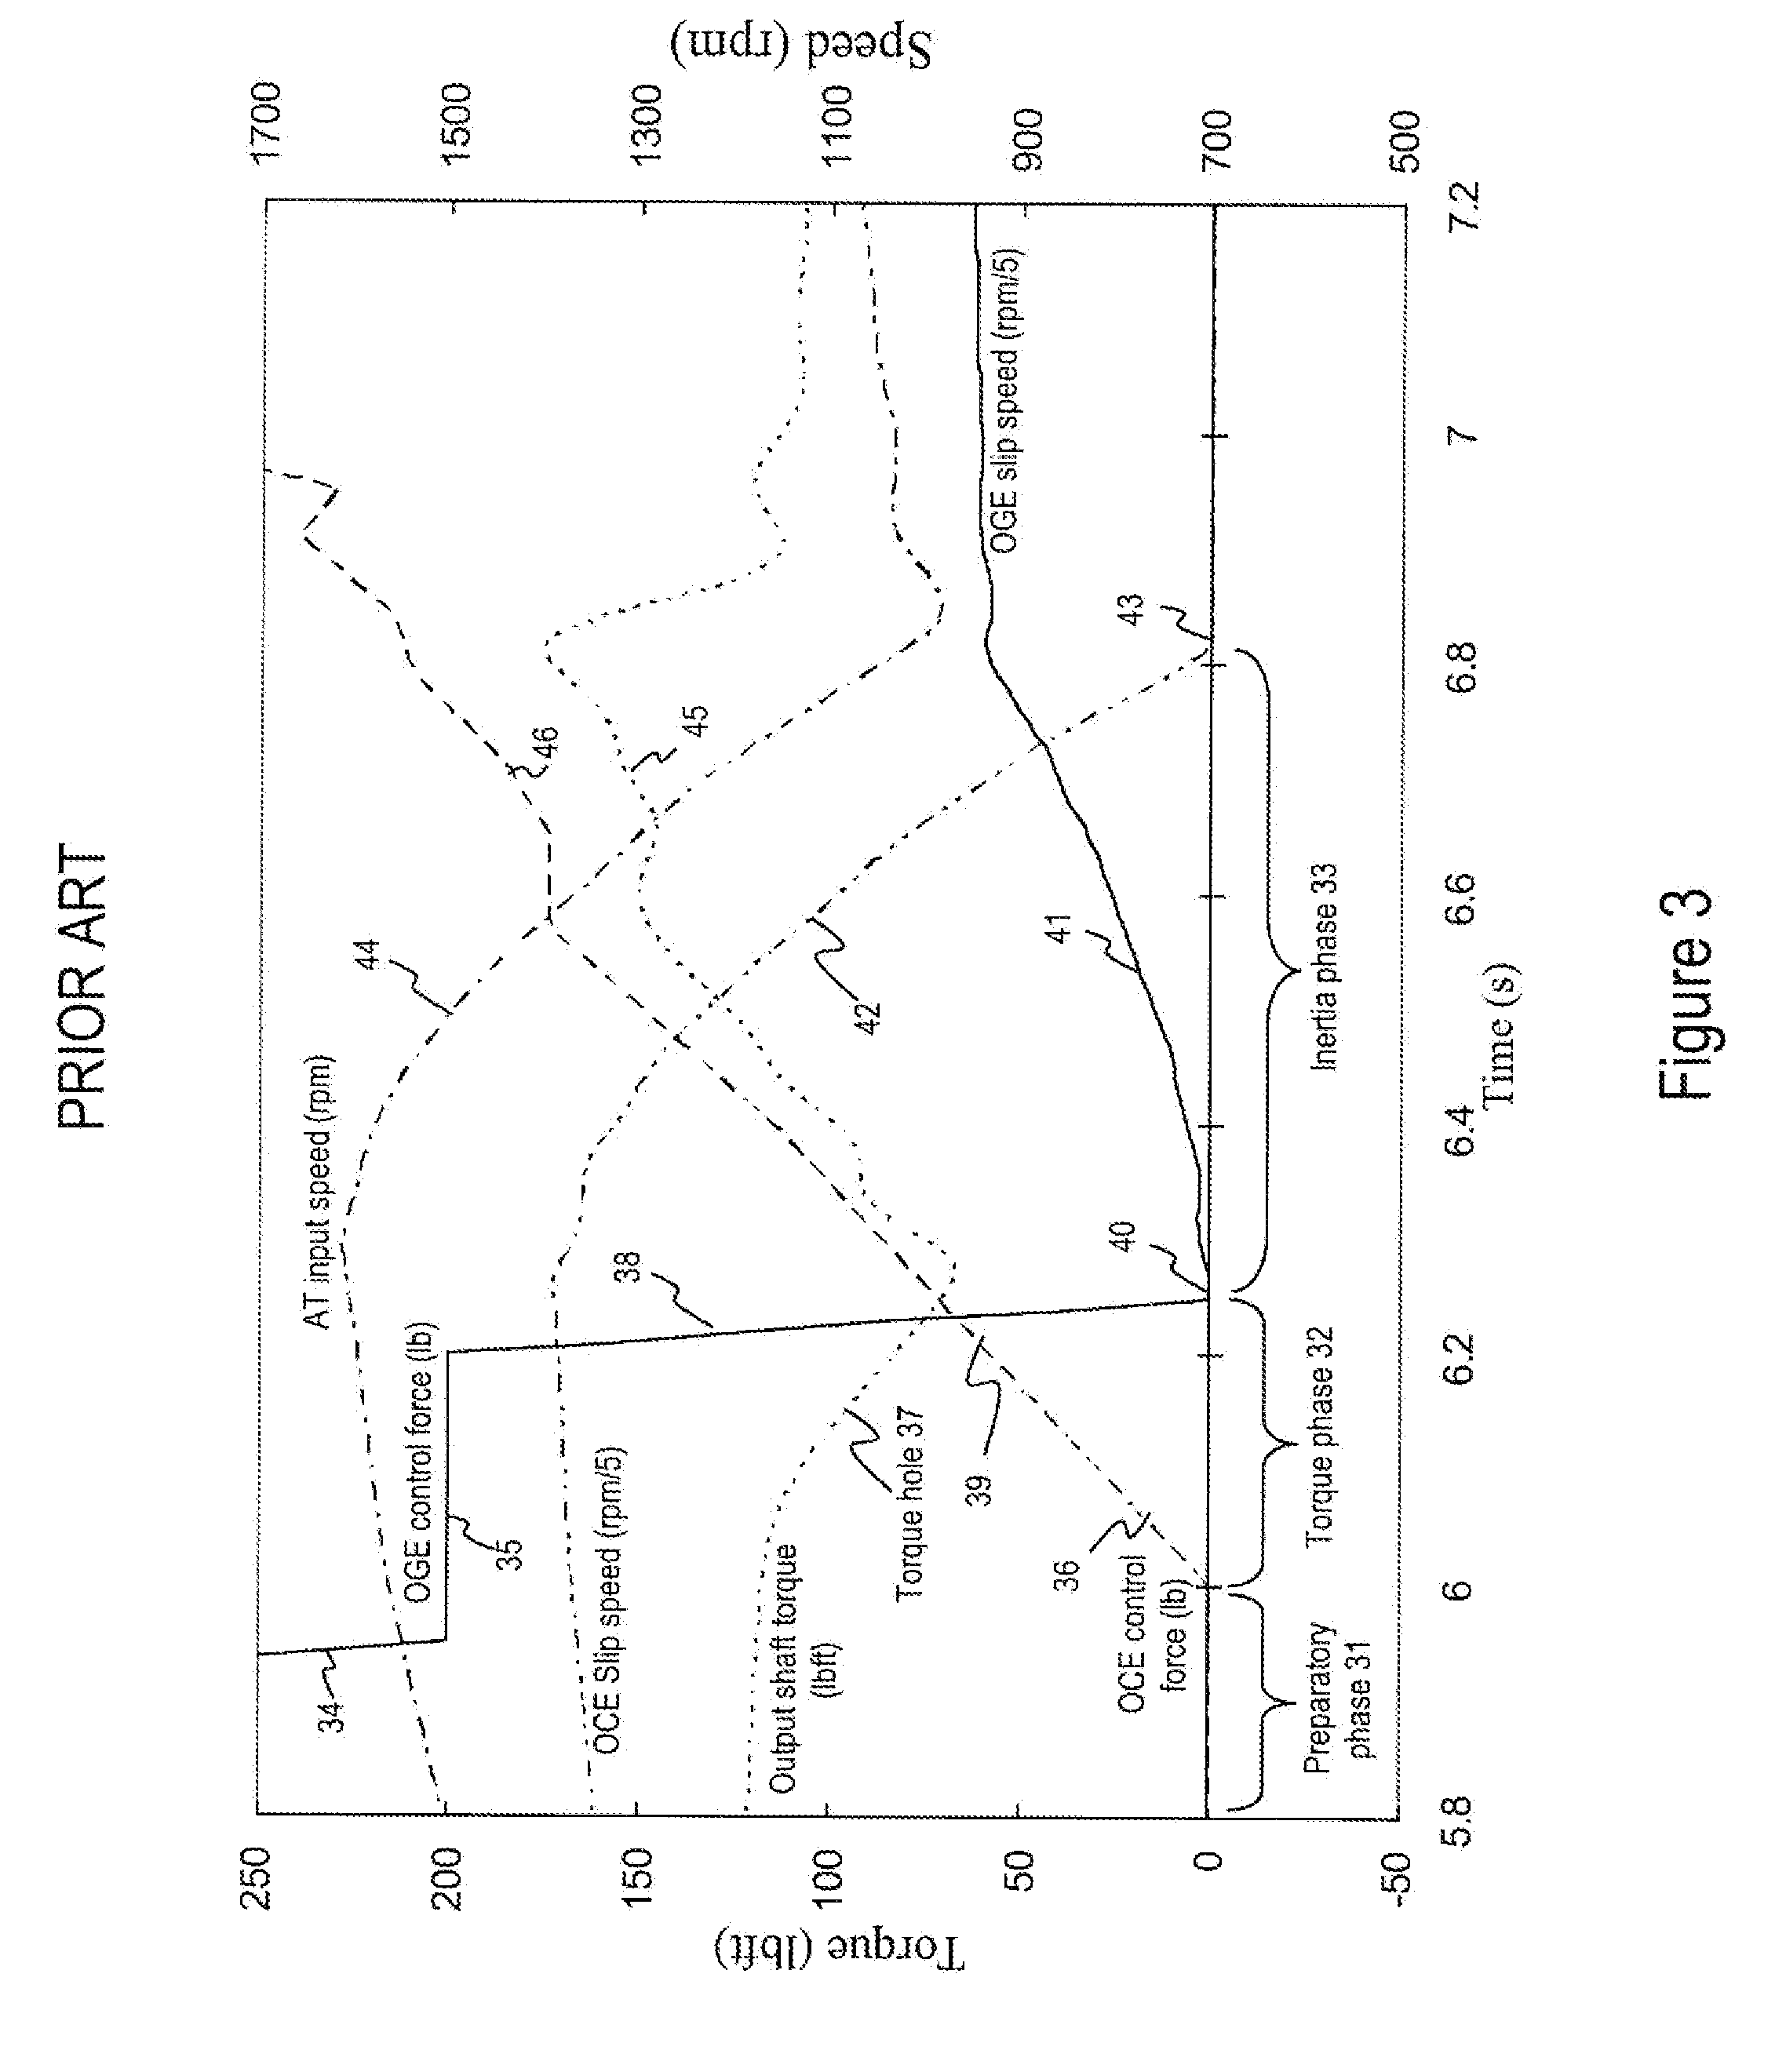 Closed-Loop Torque Phase Control for Shifting Automatic Transmission Gear Ratios Based on Friction Element Load Sensing